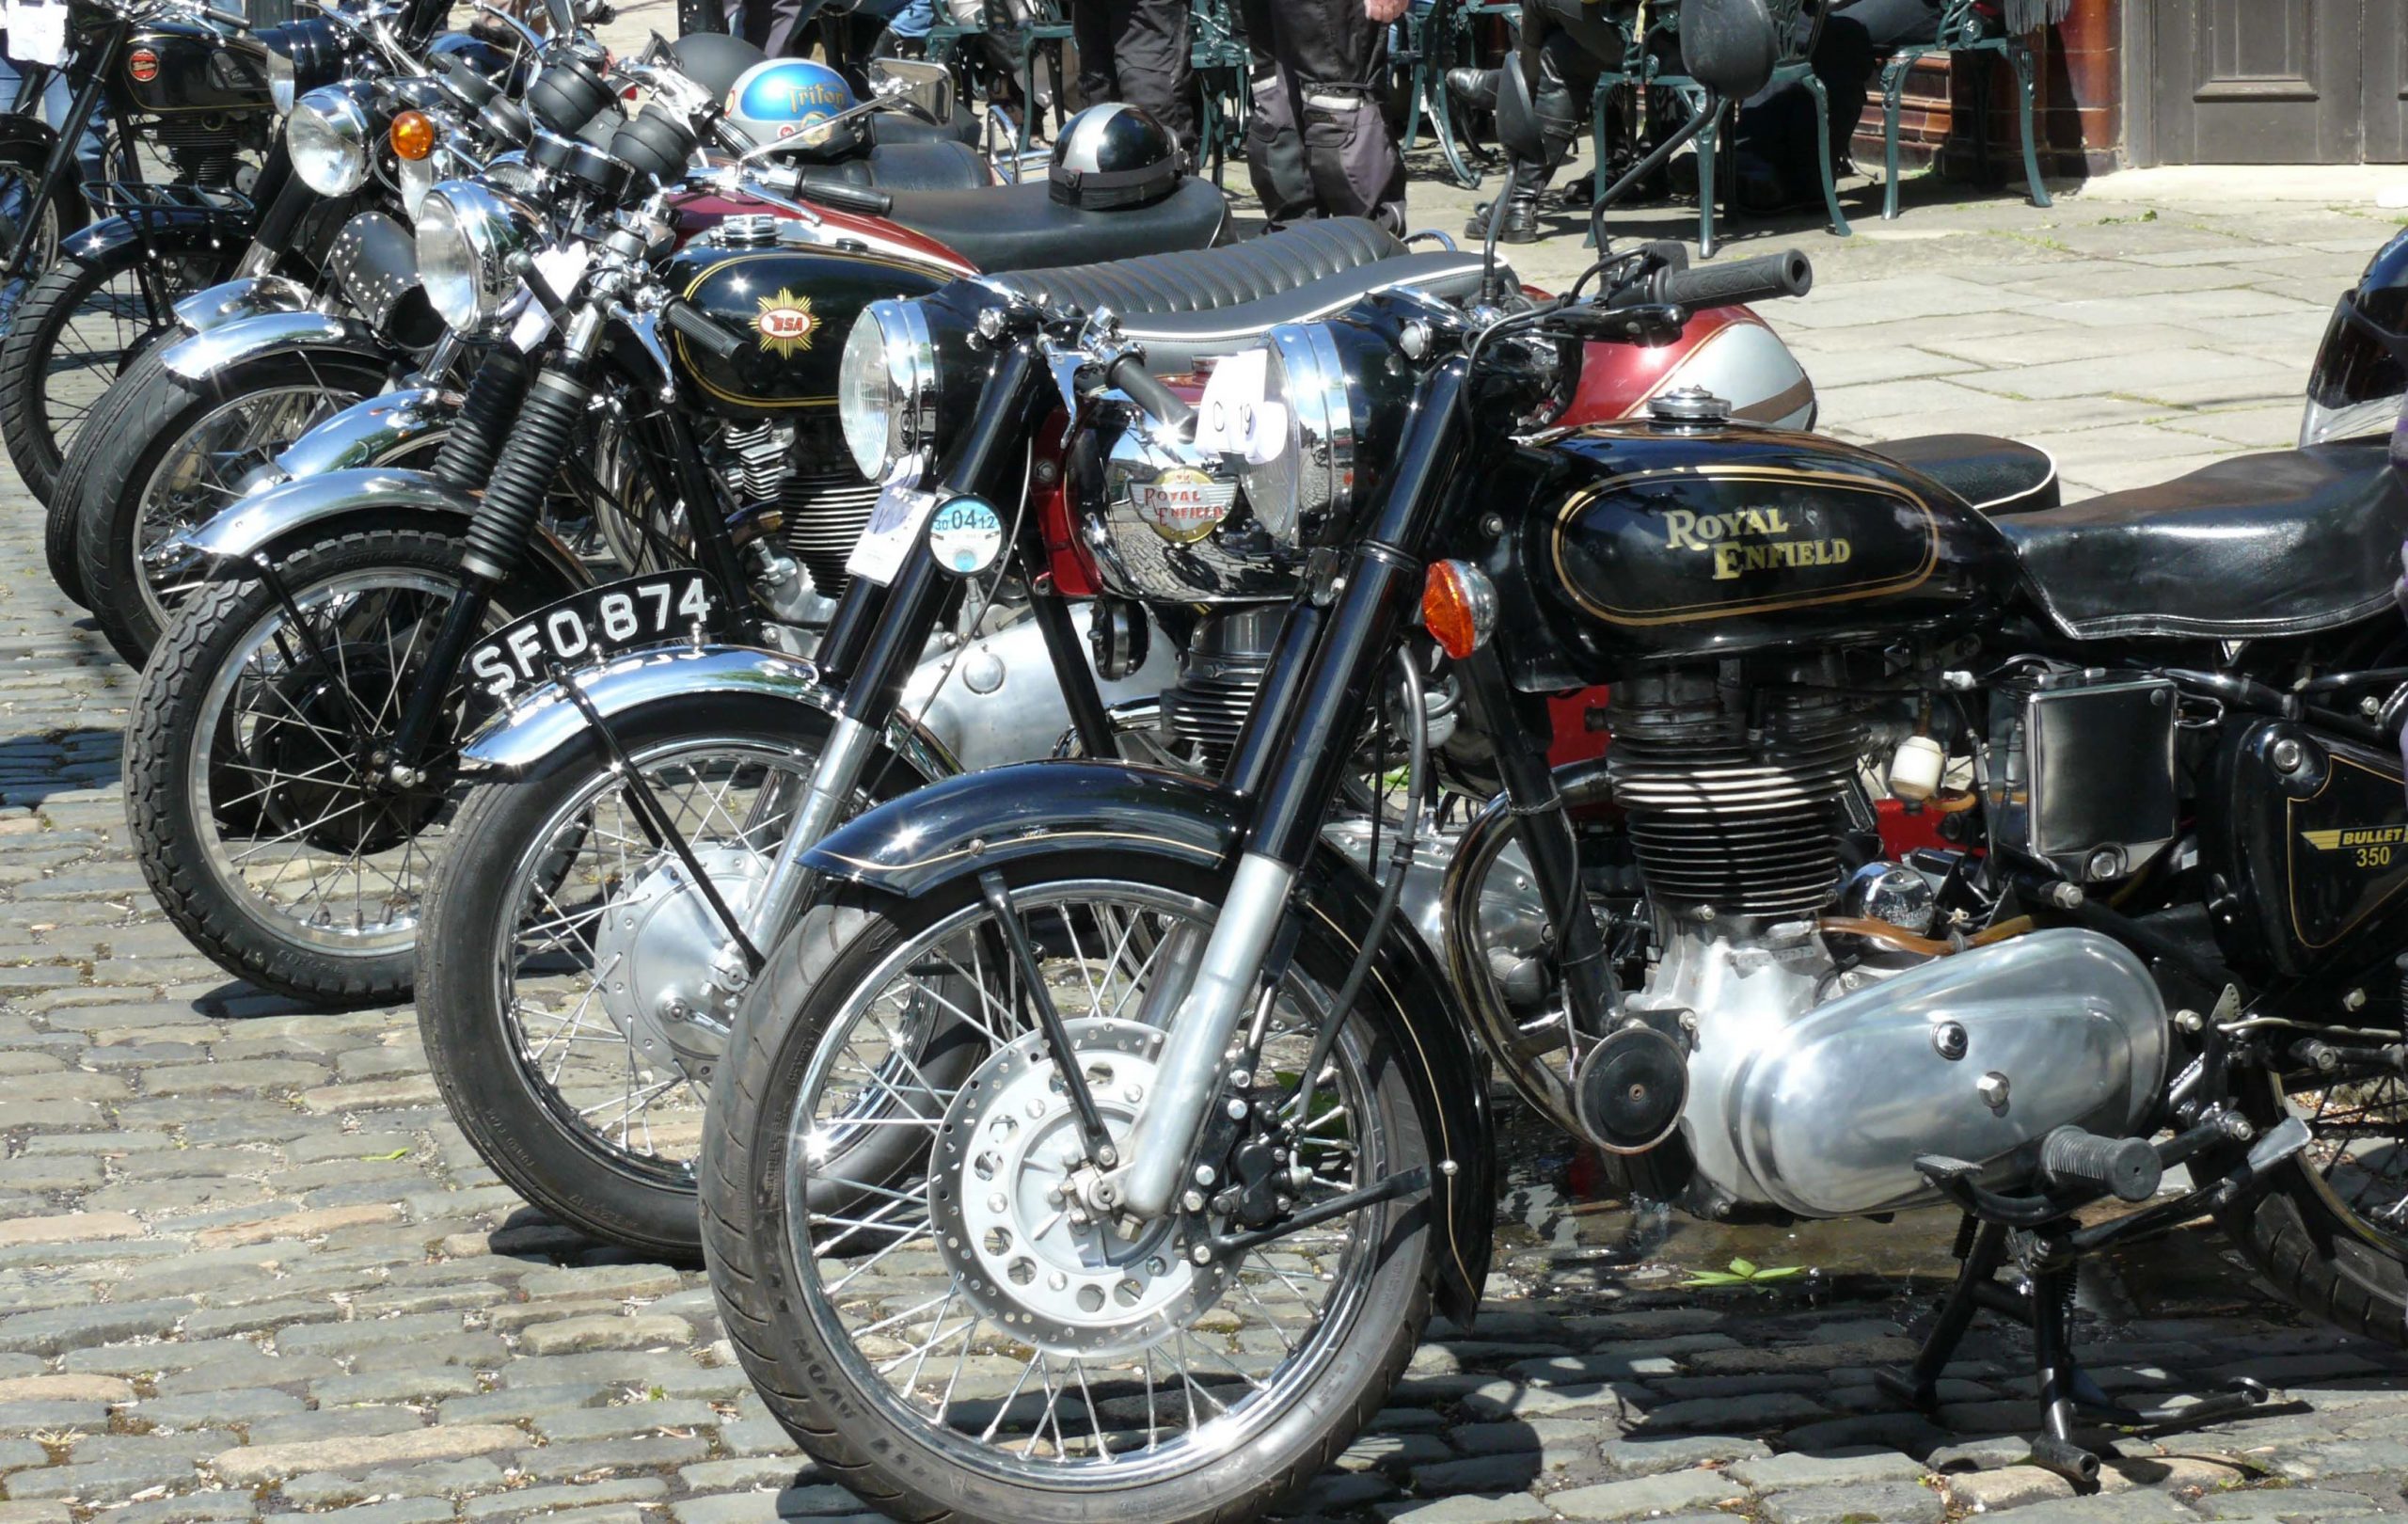 Classic Motorcycle Day at Crich Tramway Village